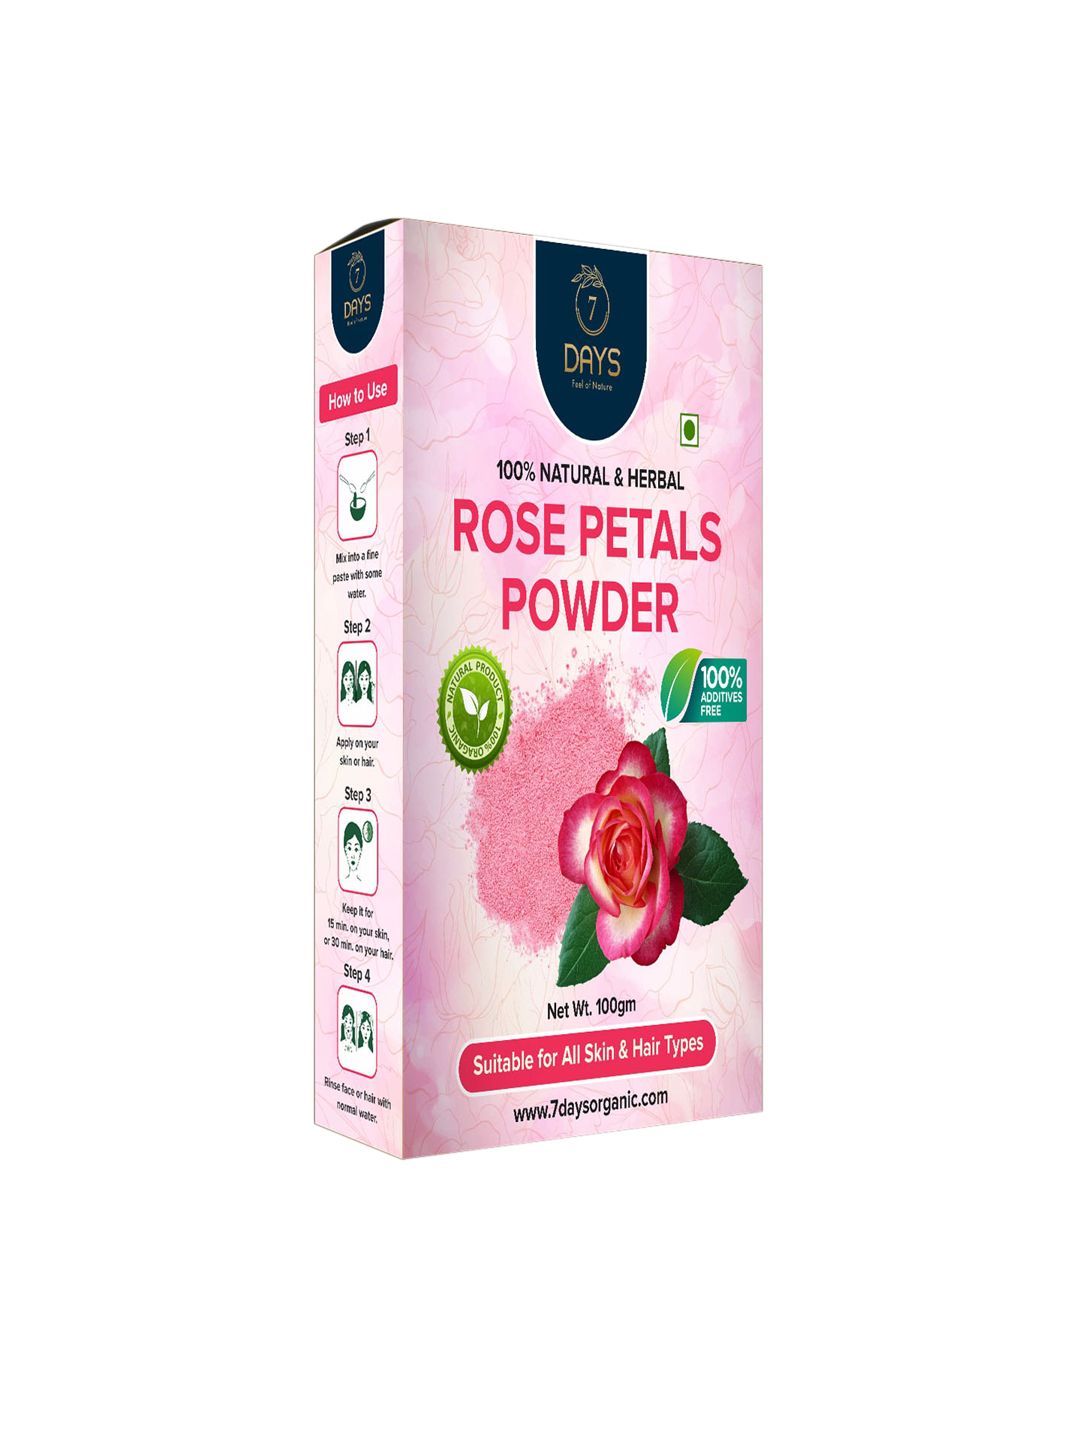 7 DAYS 100% Natural & Pure Rose Petals Powder for Hair & Skin - 100 g Price in India